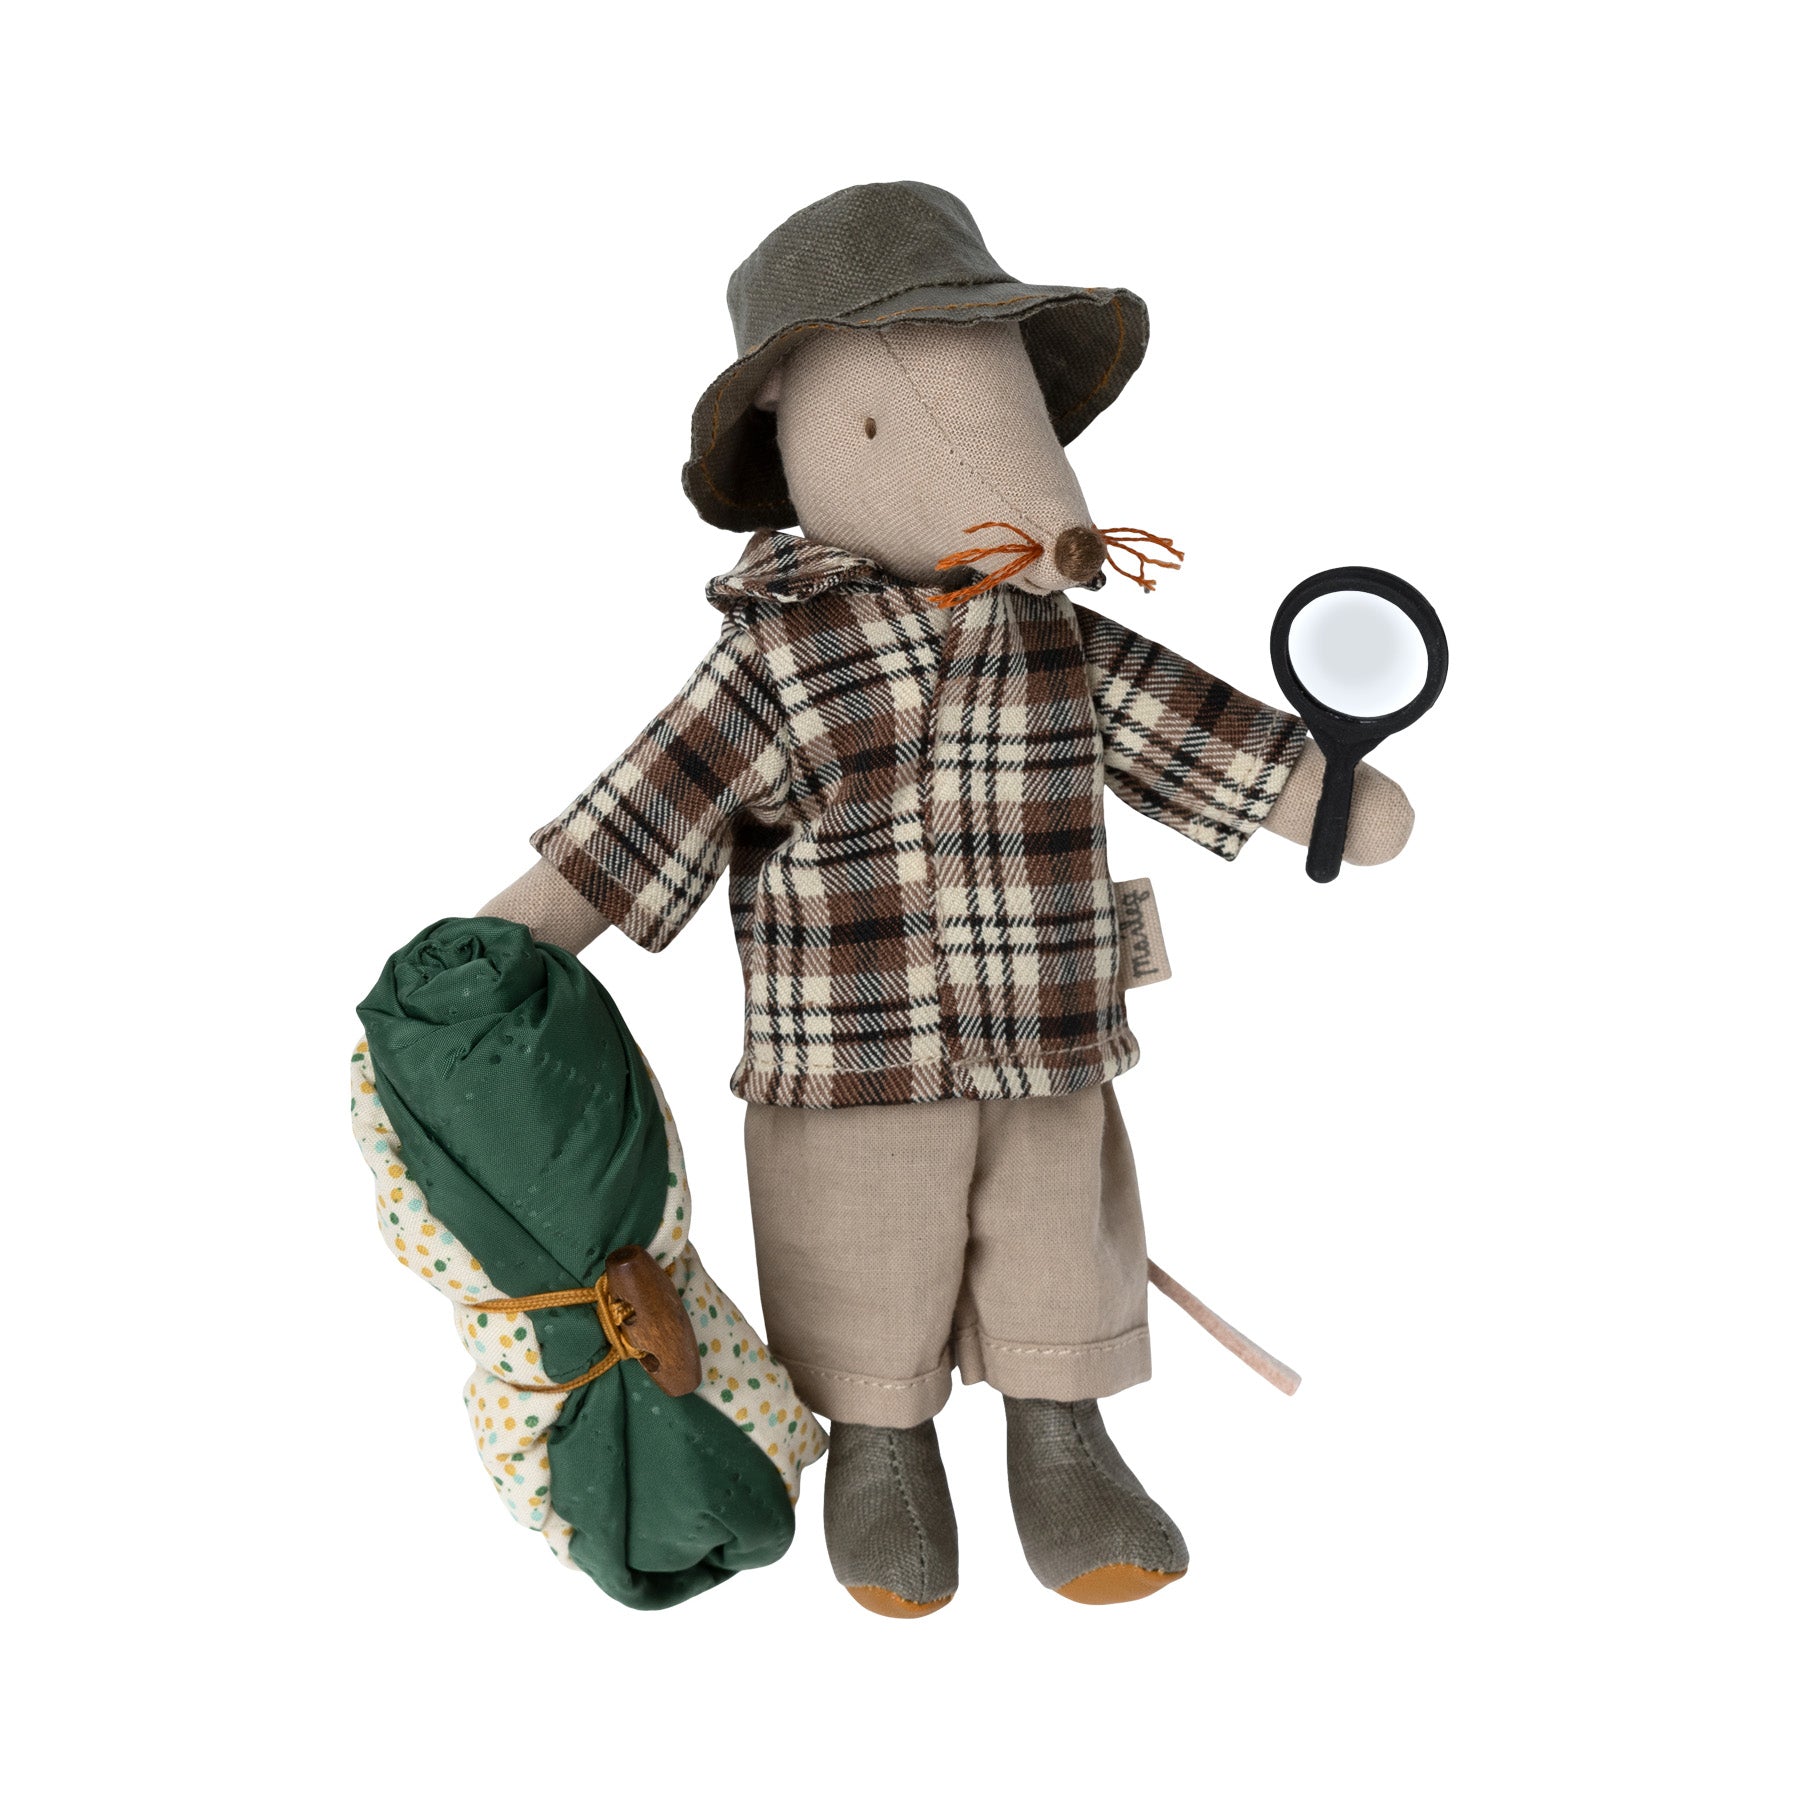 maileg guide mouse is holding a magnifying glass and sleeping bag and dressed in a check shirt.